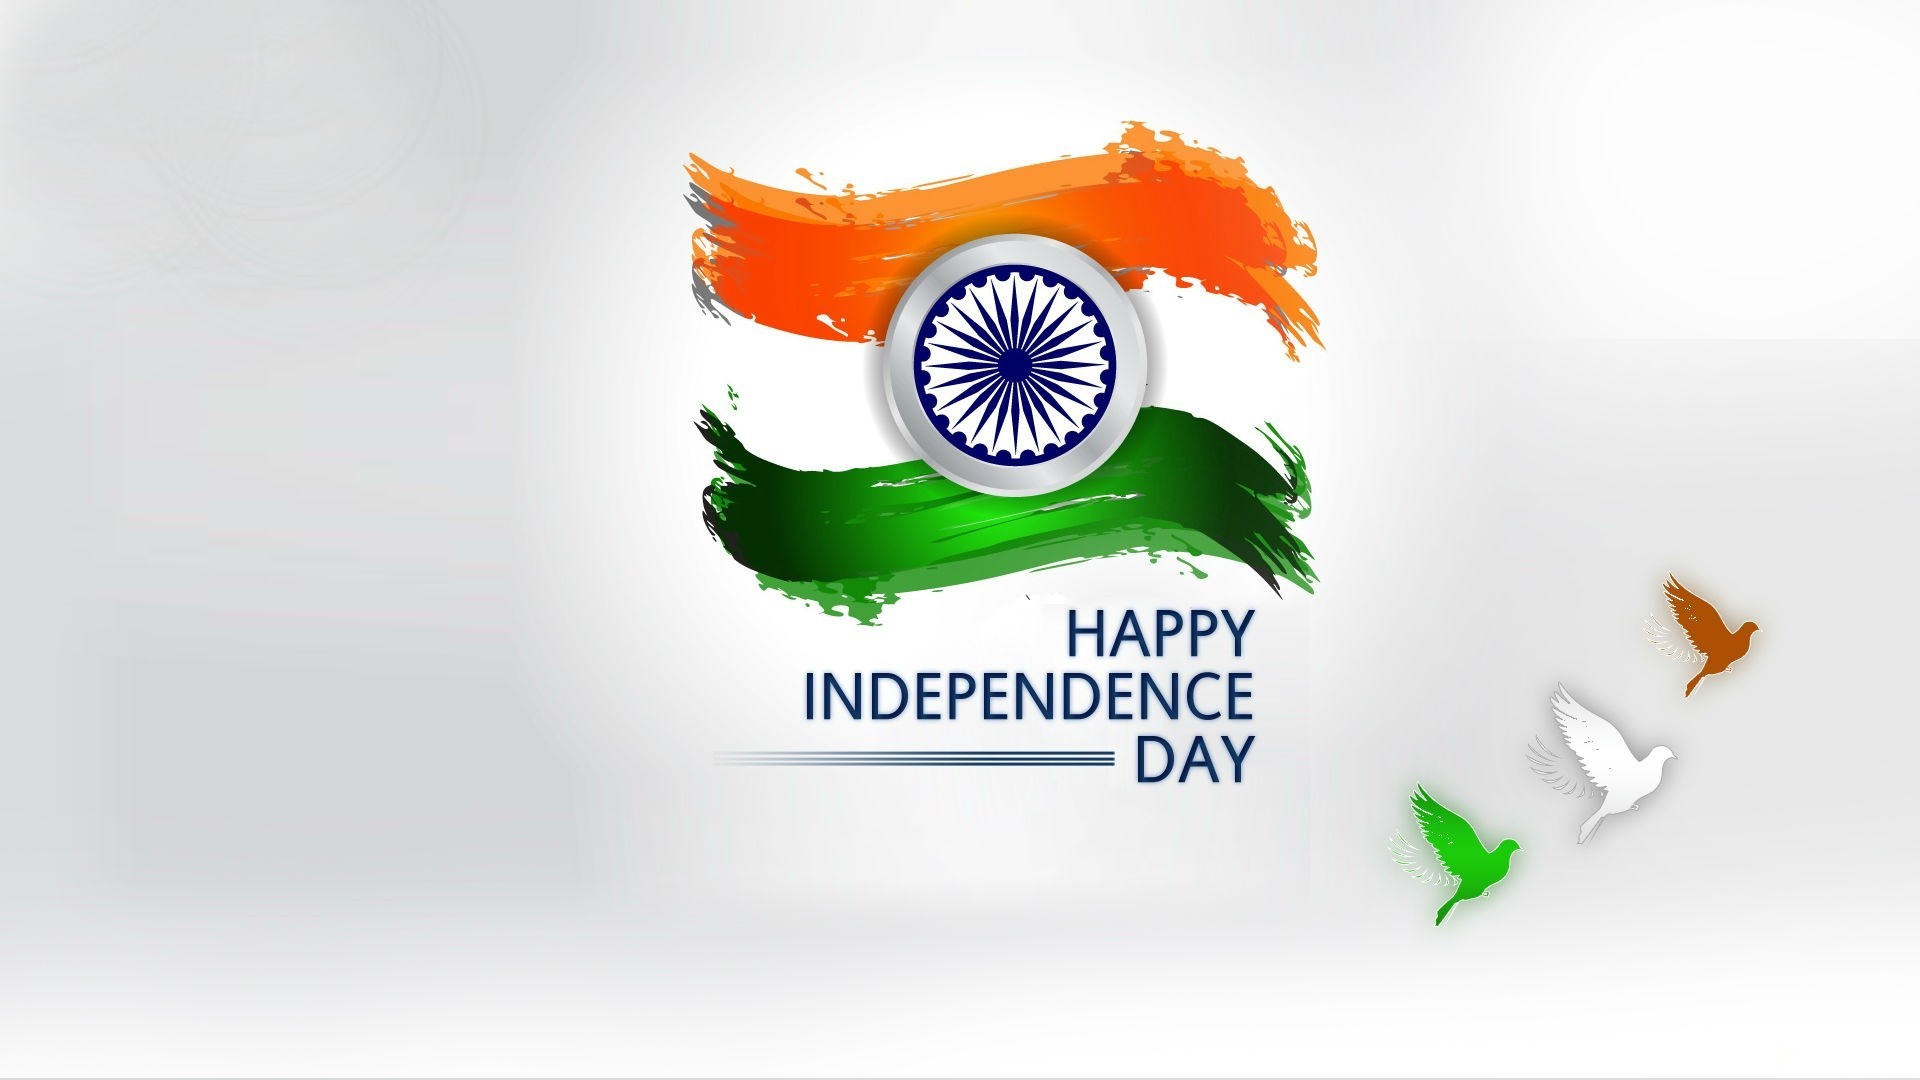 We are proudly celebrating the 72nd Independence Day of India!